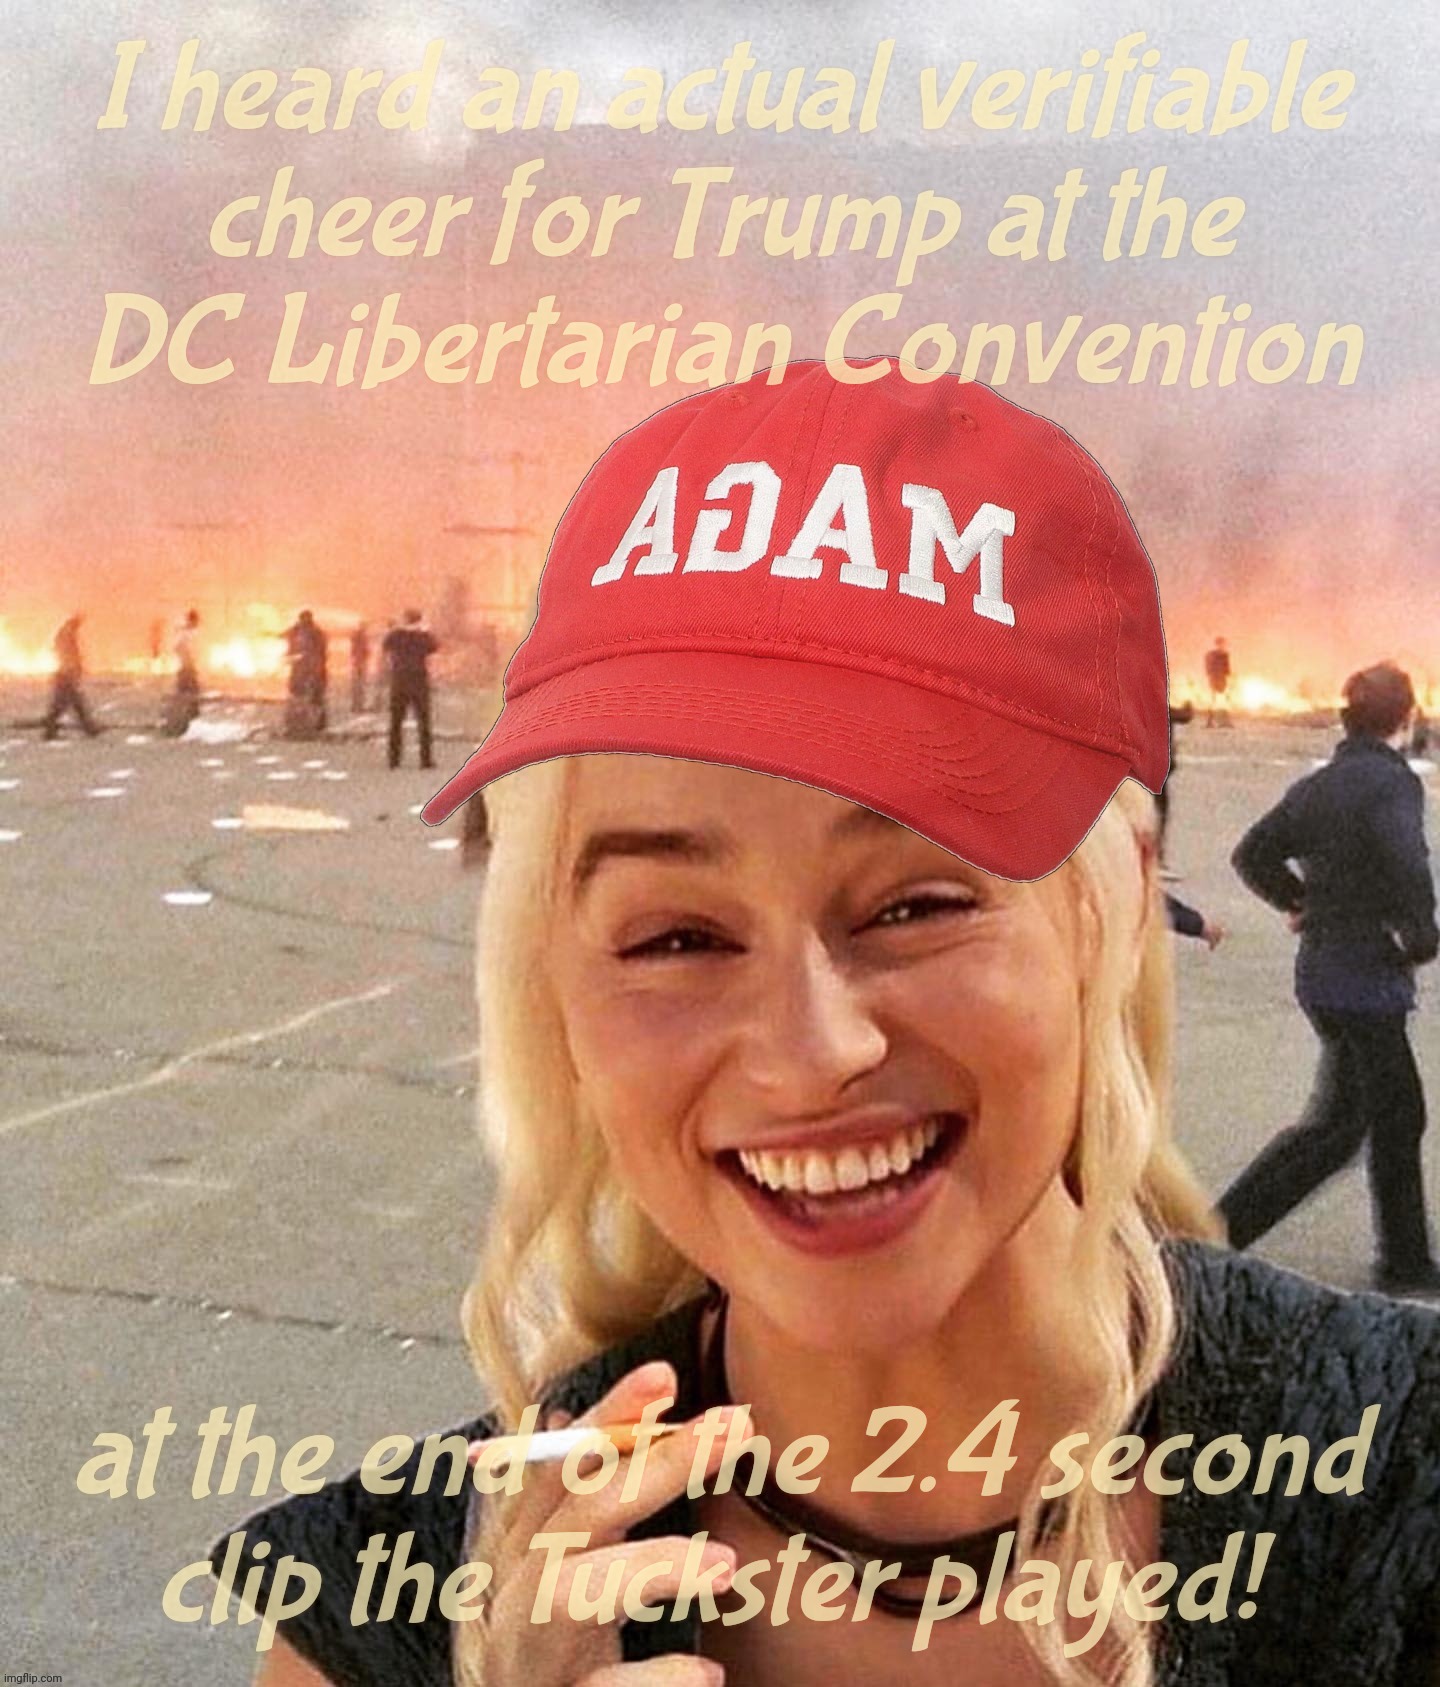 No, they were yelling, "Bruuuuuuuuuuuuuuuuuuuuce" | I heard an actual verifiable
cheer for Trump at the
DC Libertarian Convention; at the end of the 2.4 second
clip the Tuckster played! | image tagged in disaster smoker girl maga edition,trump booed and libertarian convention,bruuuuuuuuuuuuce,how's that for redemption,trump | made w/ Imgflip meme maker